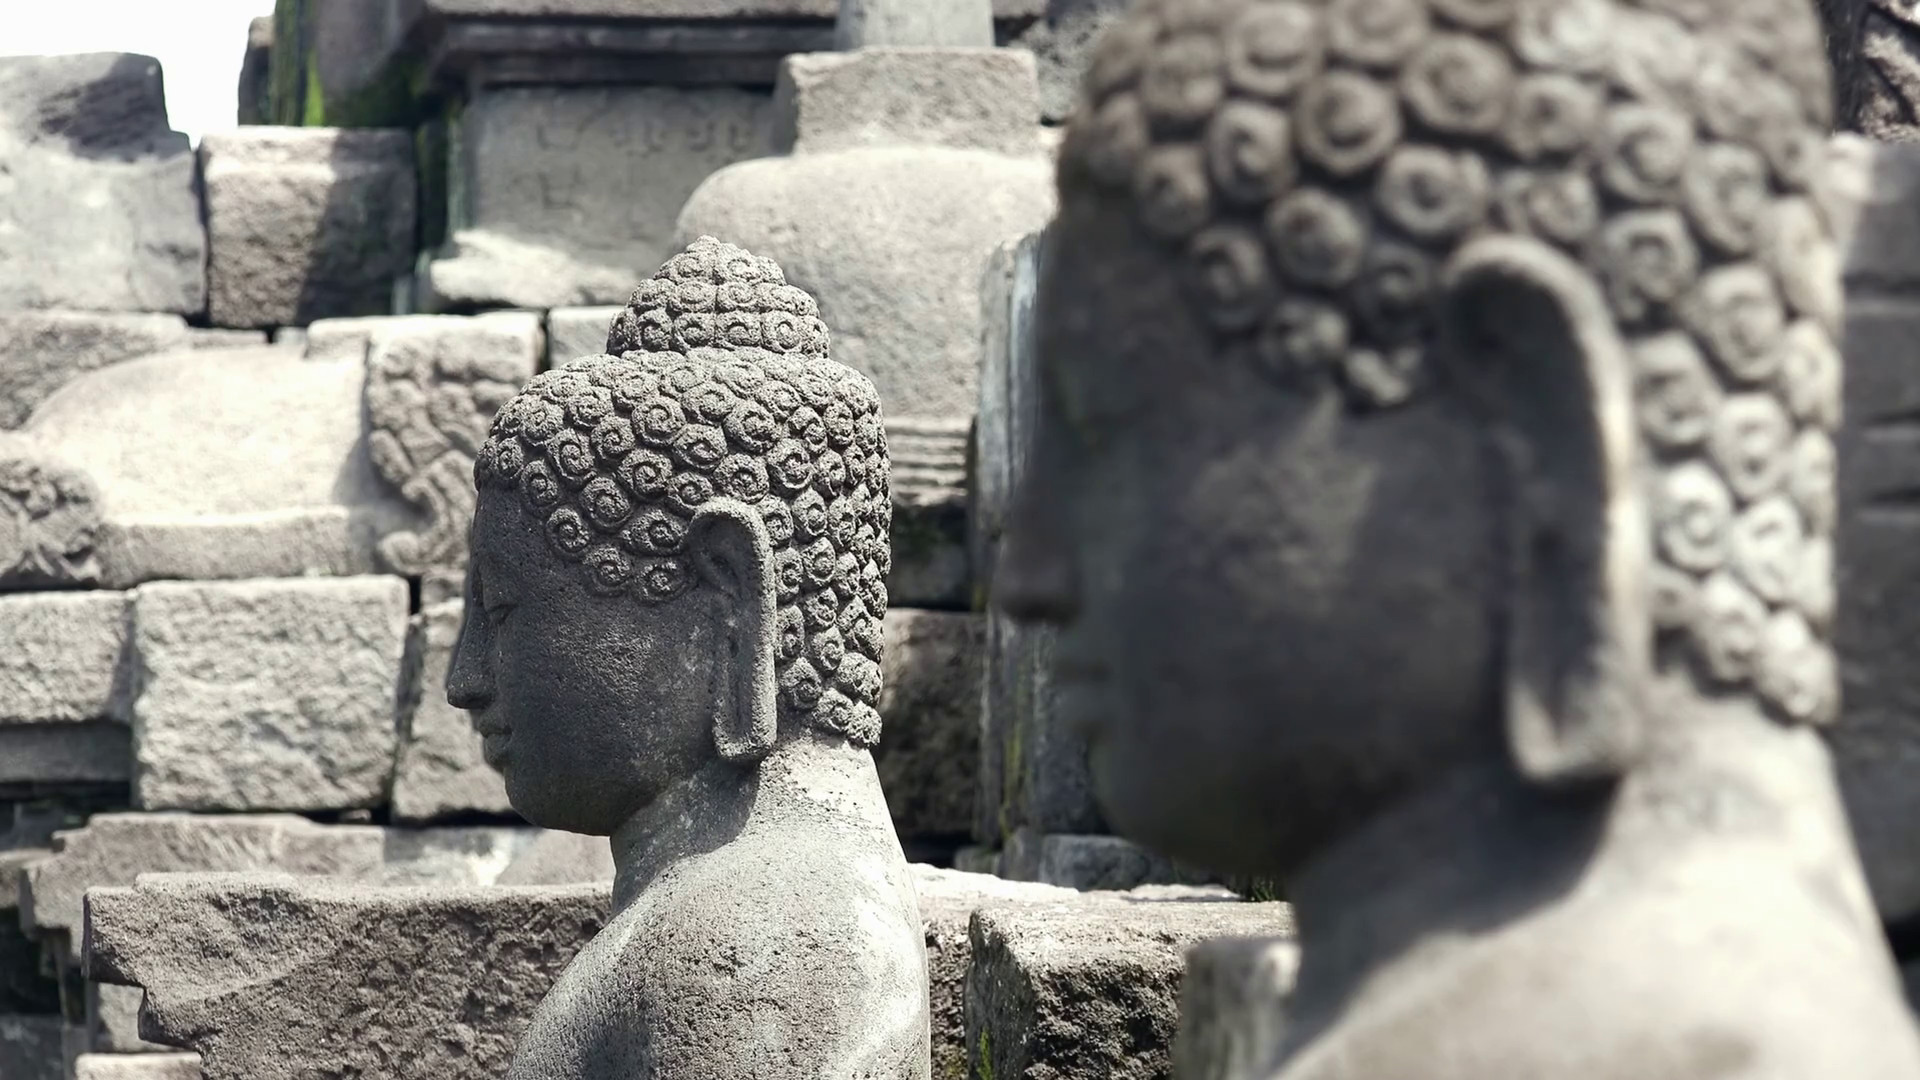 1920x1080 ... by sun at Borobudur Buddhist temple in Magelang, Central Java,  Indonesia. Sanctuary decoration. Focus switches from background to  foreground.